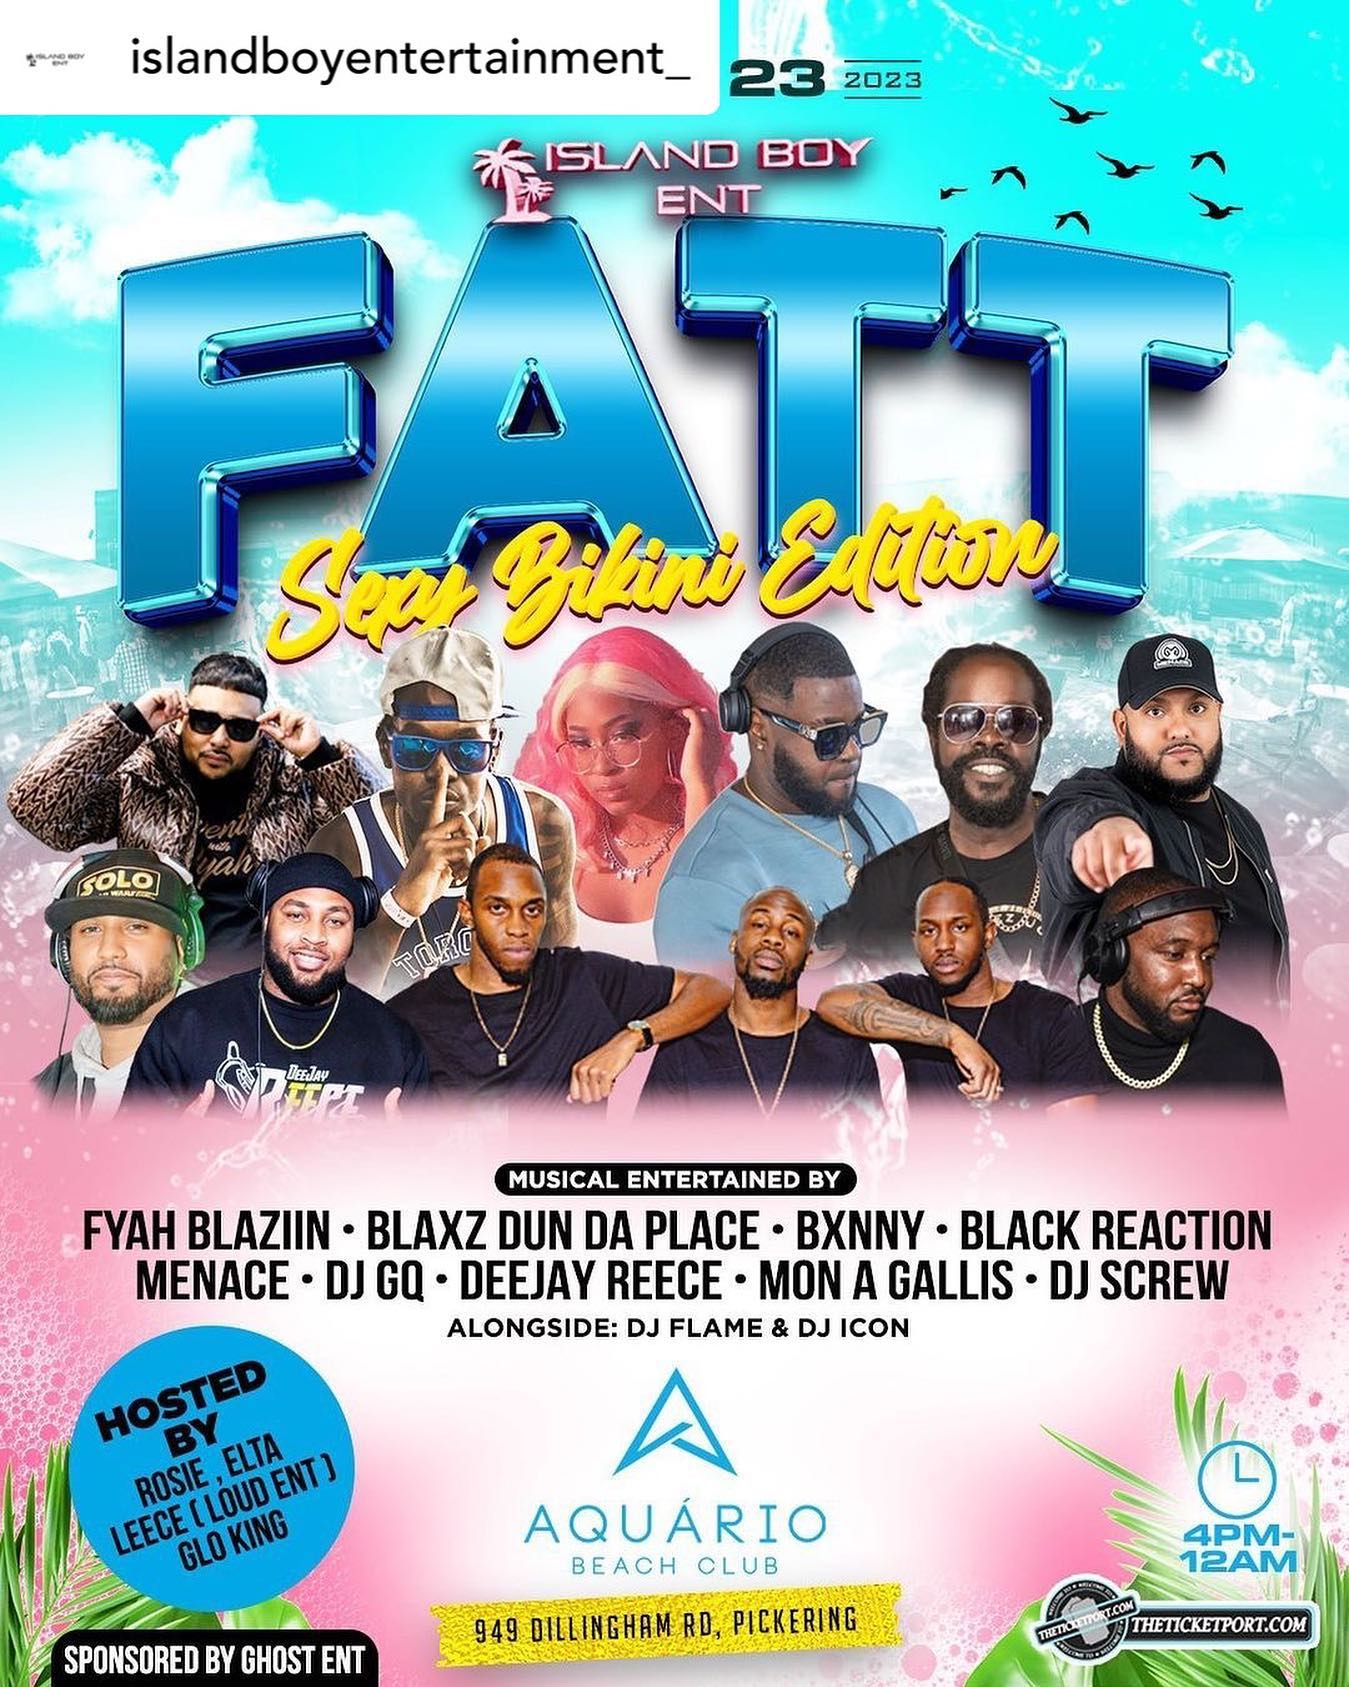 Island Boy Ent Presents 

FATT “Sexy Bikini  Edition”

Sunday July 23rd 2023 

Event Take place at Aquario Beach Club 
@aquariobeach 🏖️ 4-12 ! 

1st 100 people receive Island Boy Ent /FATT Merch/ Goodies !

This event Ladies it’s all about you! We want to see the sexiest bikinis  you got , there will be a grand prize for SEXIEST BIKINI!

FATT returns Bigger than ever with The top Dancehall and Soca DJs in the City !

All star DJ Line up:
@fyahblaziin 
@mrworkinghours 
@blackreactionsound 
@itsmenacethedj 
@monagallissound 
@dj.bxnny_ 
@deejayreece_ 
@djscrewinternational 
@gq_gentlemans_quarters 

Early Vibes :
@_flamethedj 
@icon416 
@elevatethedj 

Hosted by :
@rosie_posie2011 
leedonnnn (Loud Ent)
@elta.inc 
@glo_kxng_ 

Sponsored by : 
@nugenentertainment 
GHOST ENT

For booths and Bottles  Contact ; 

@islandboyentertainment_ ISLAND BOY 
Dm or 647 572 3501 

Tickets online the ticketport.com